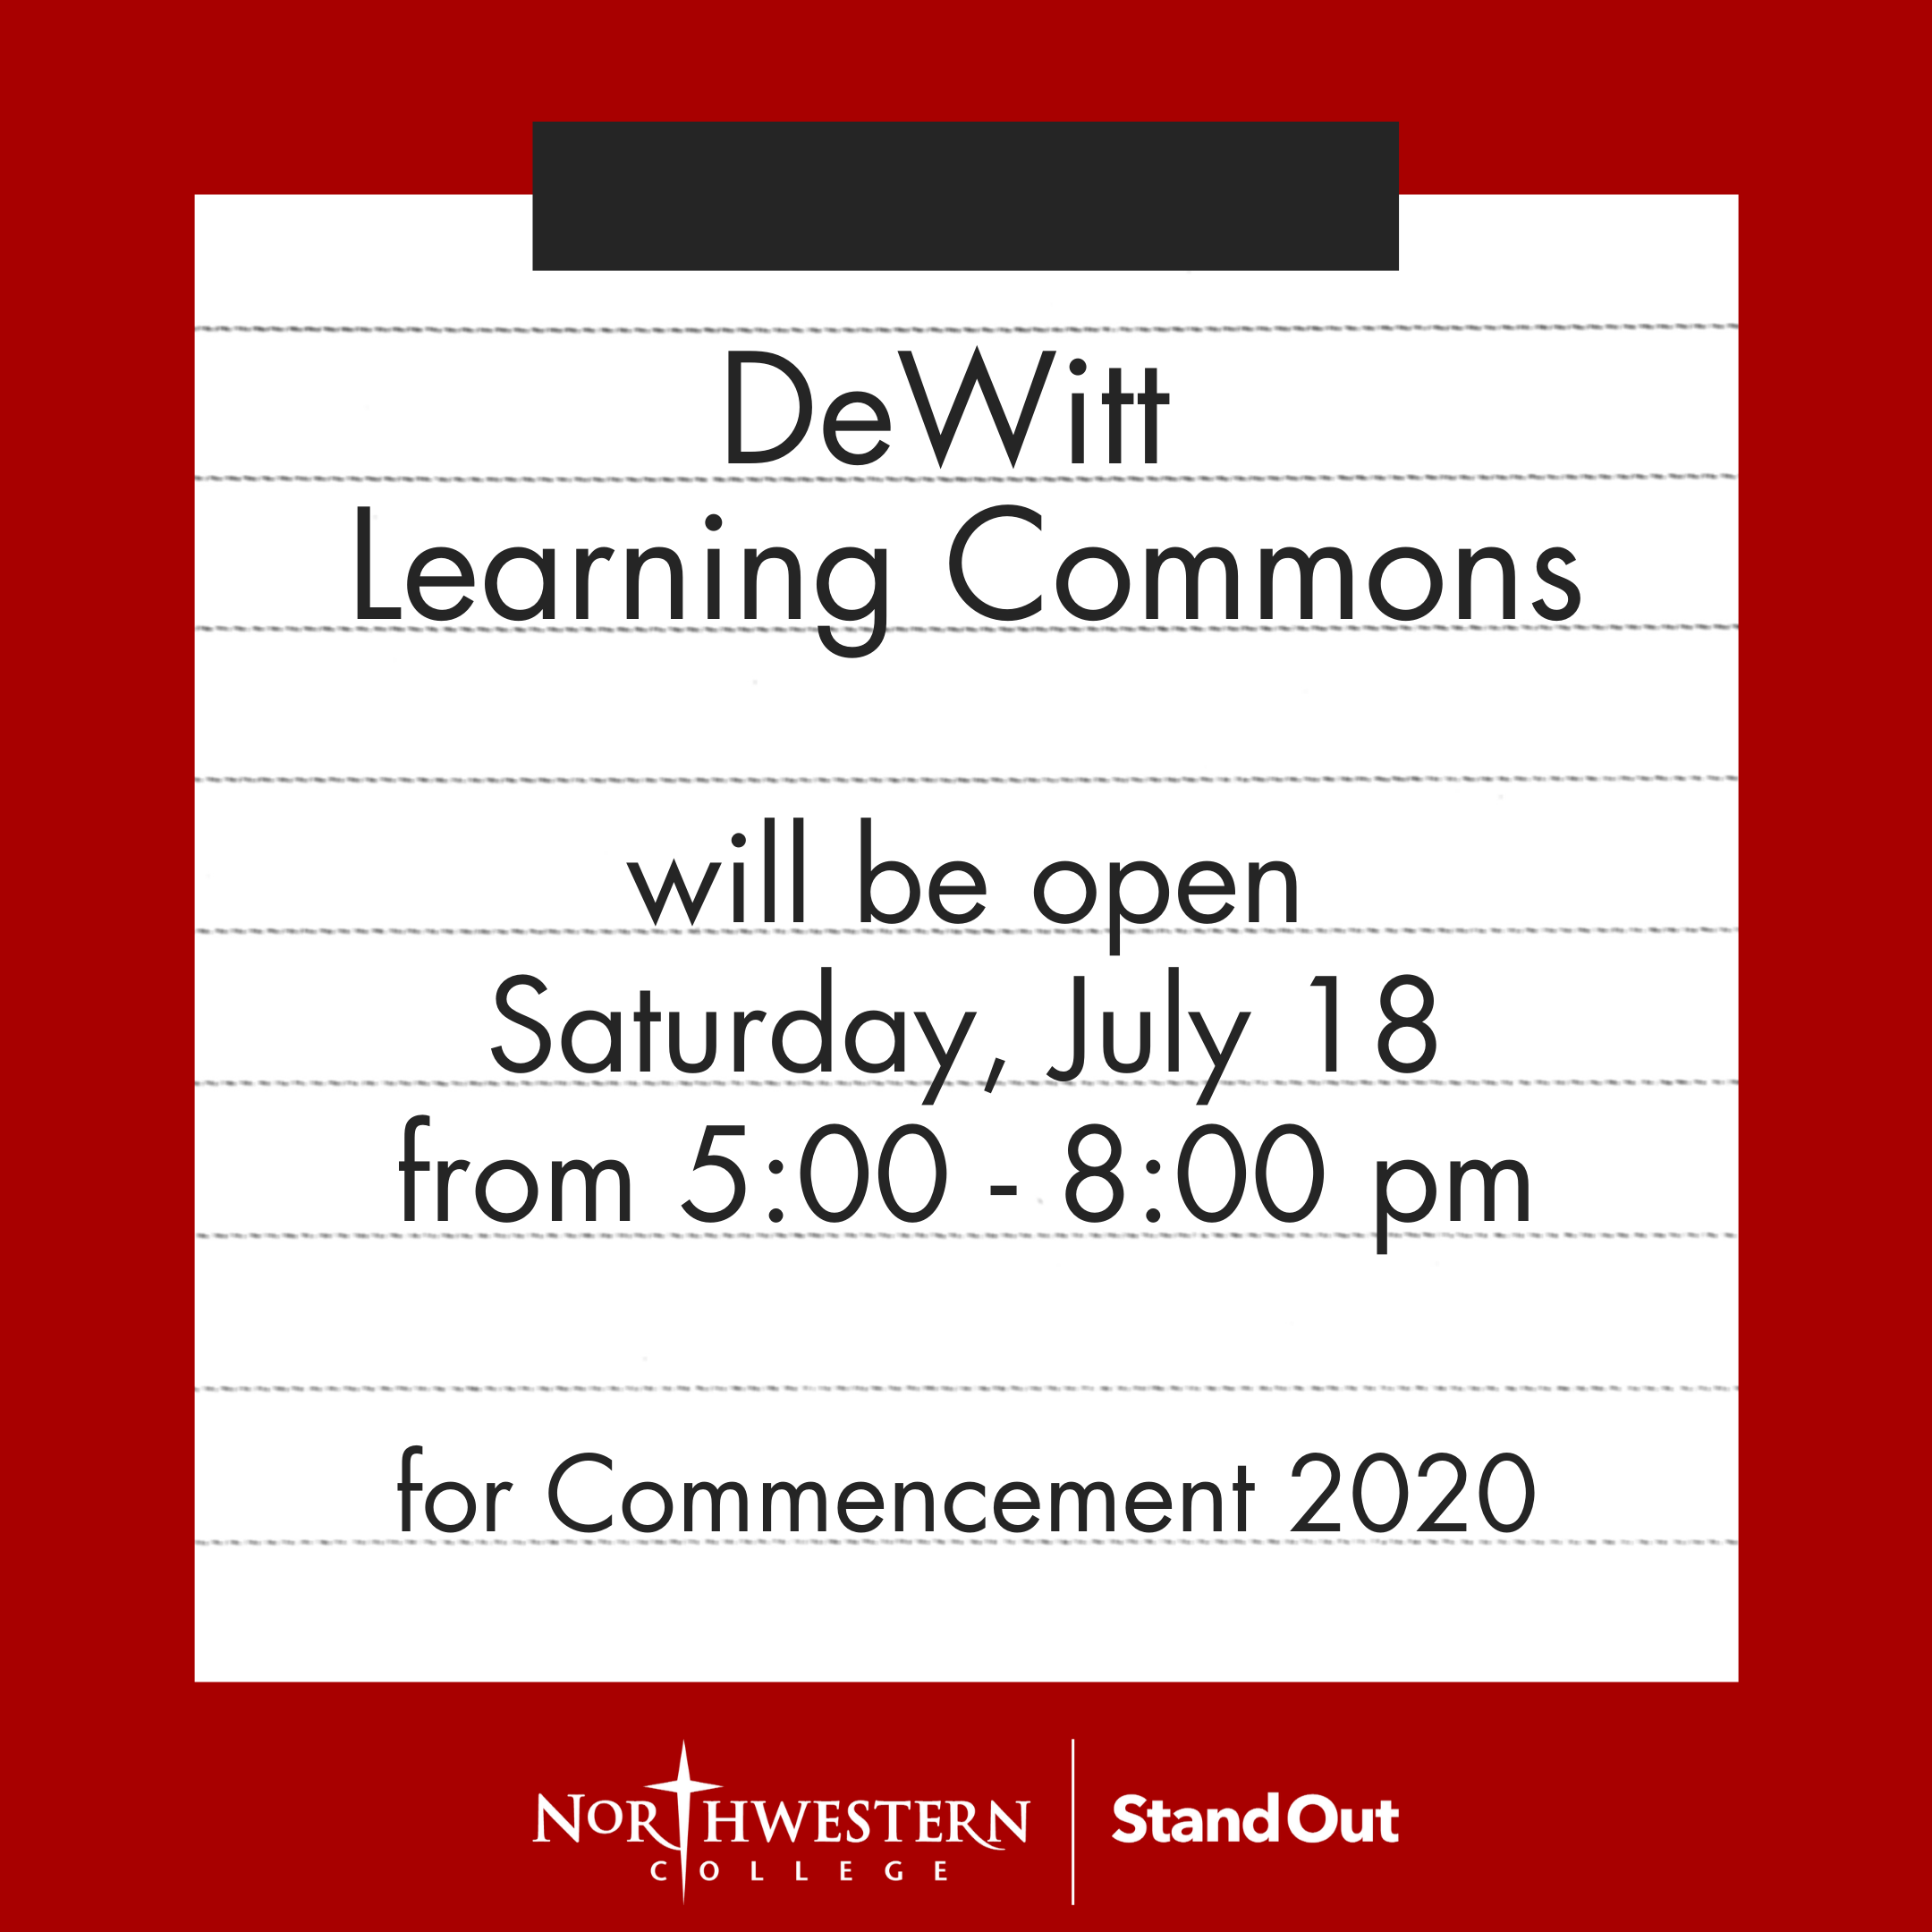 DeWitt Learning Commons will be open Saturday, July 18 from 5:00 - 8:00 pm.